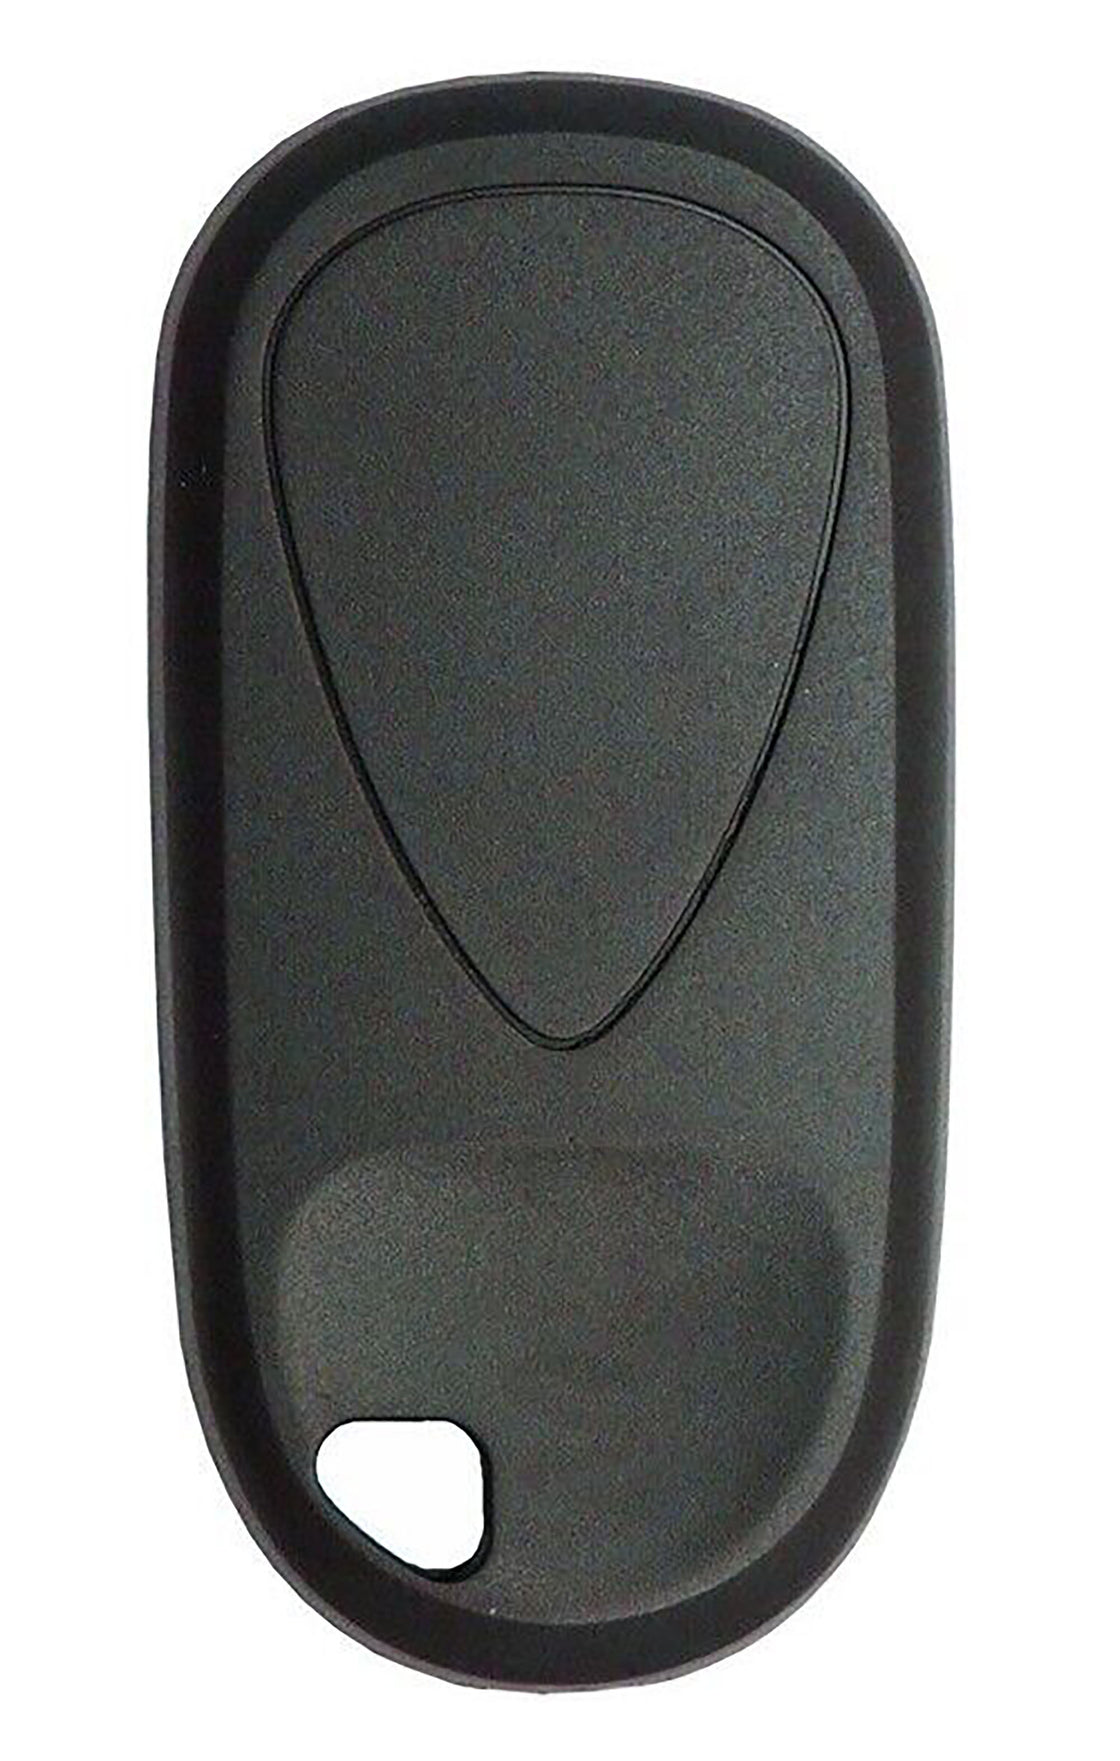 1x New Replacement Key Fob Remote Compatible with & Fit For Acura Vehicles (Check Fitment) - MPN OUCG8D-355H-A-02